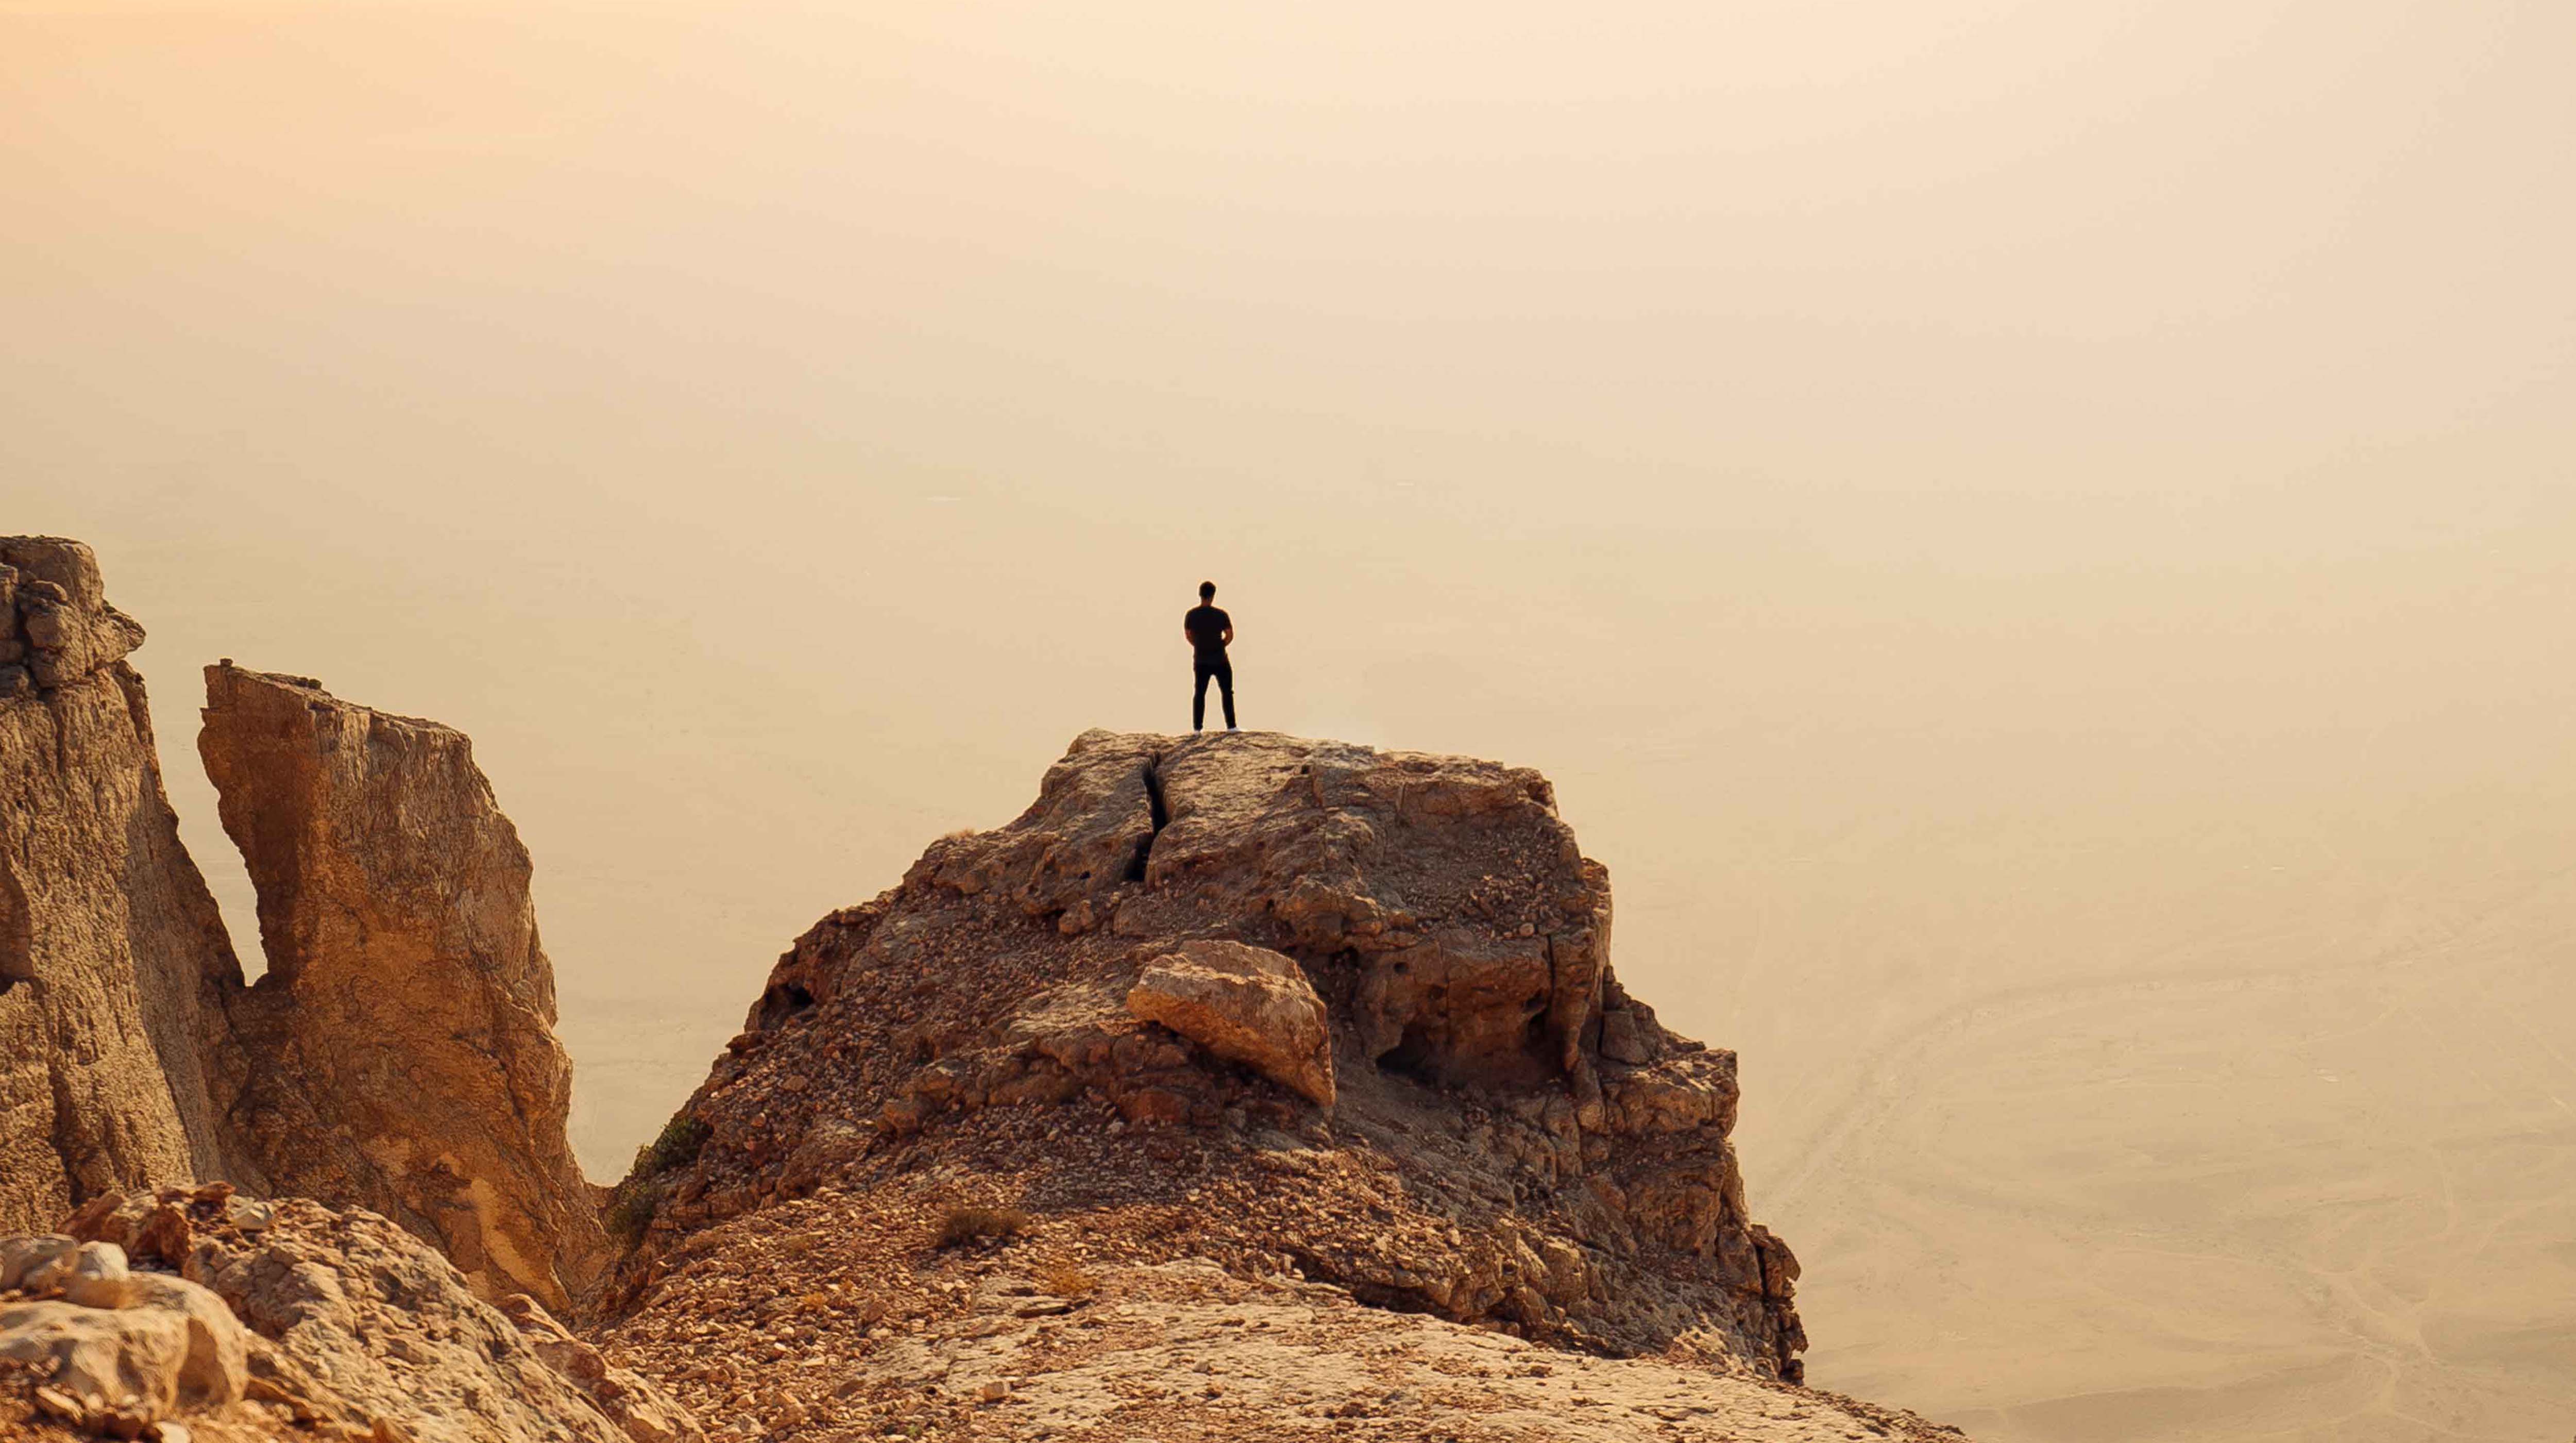 essential things to do in al ain